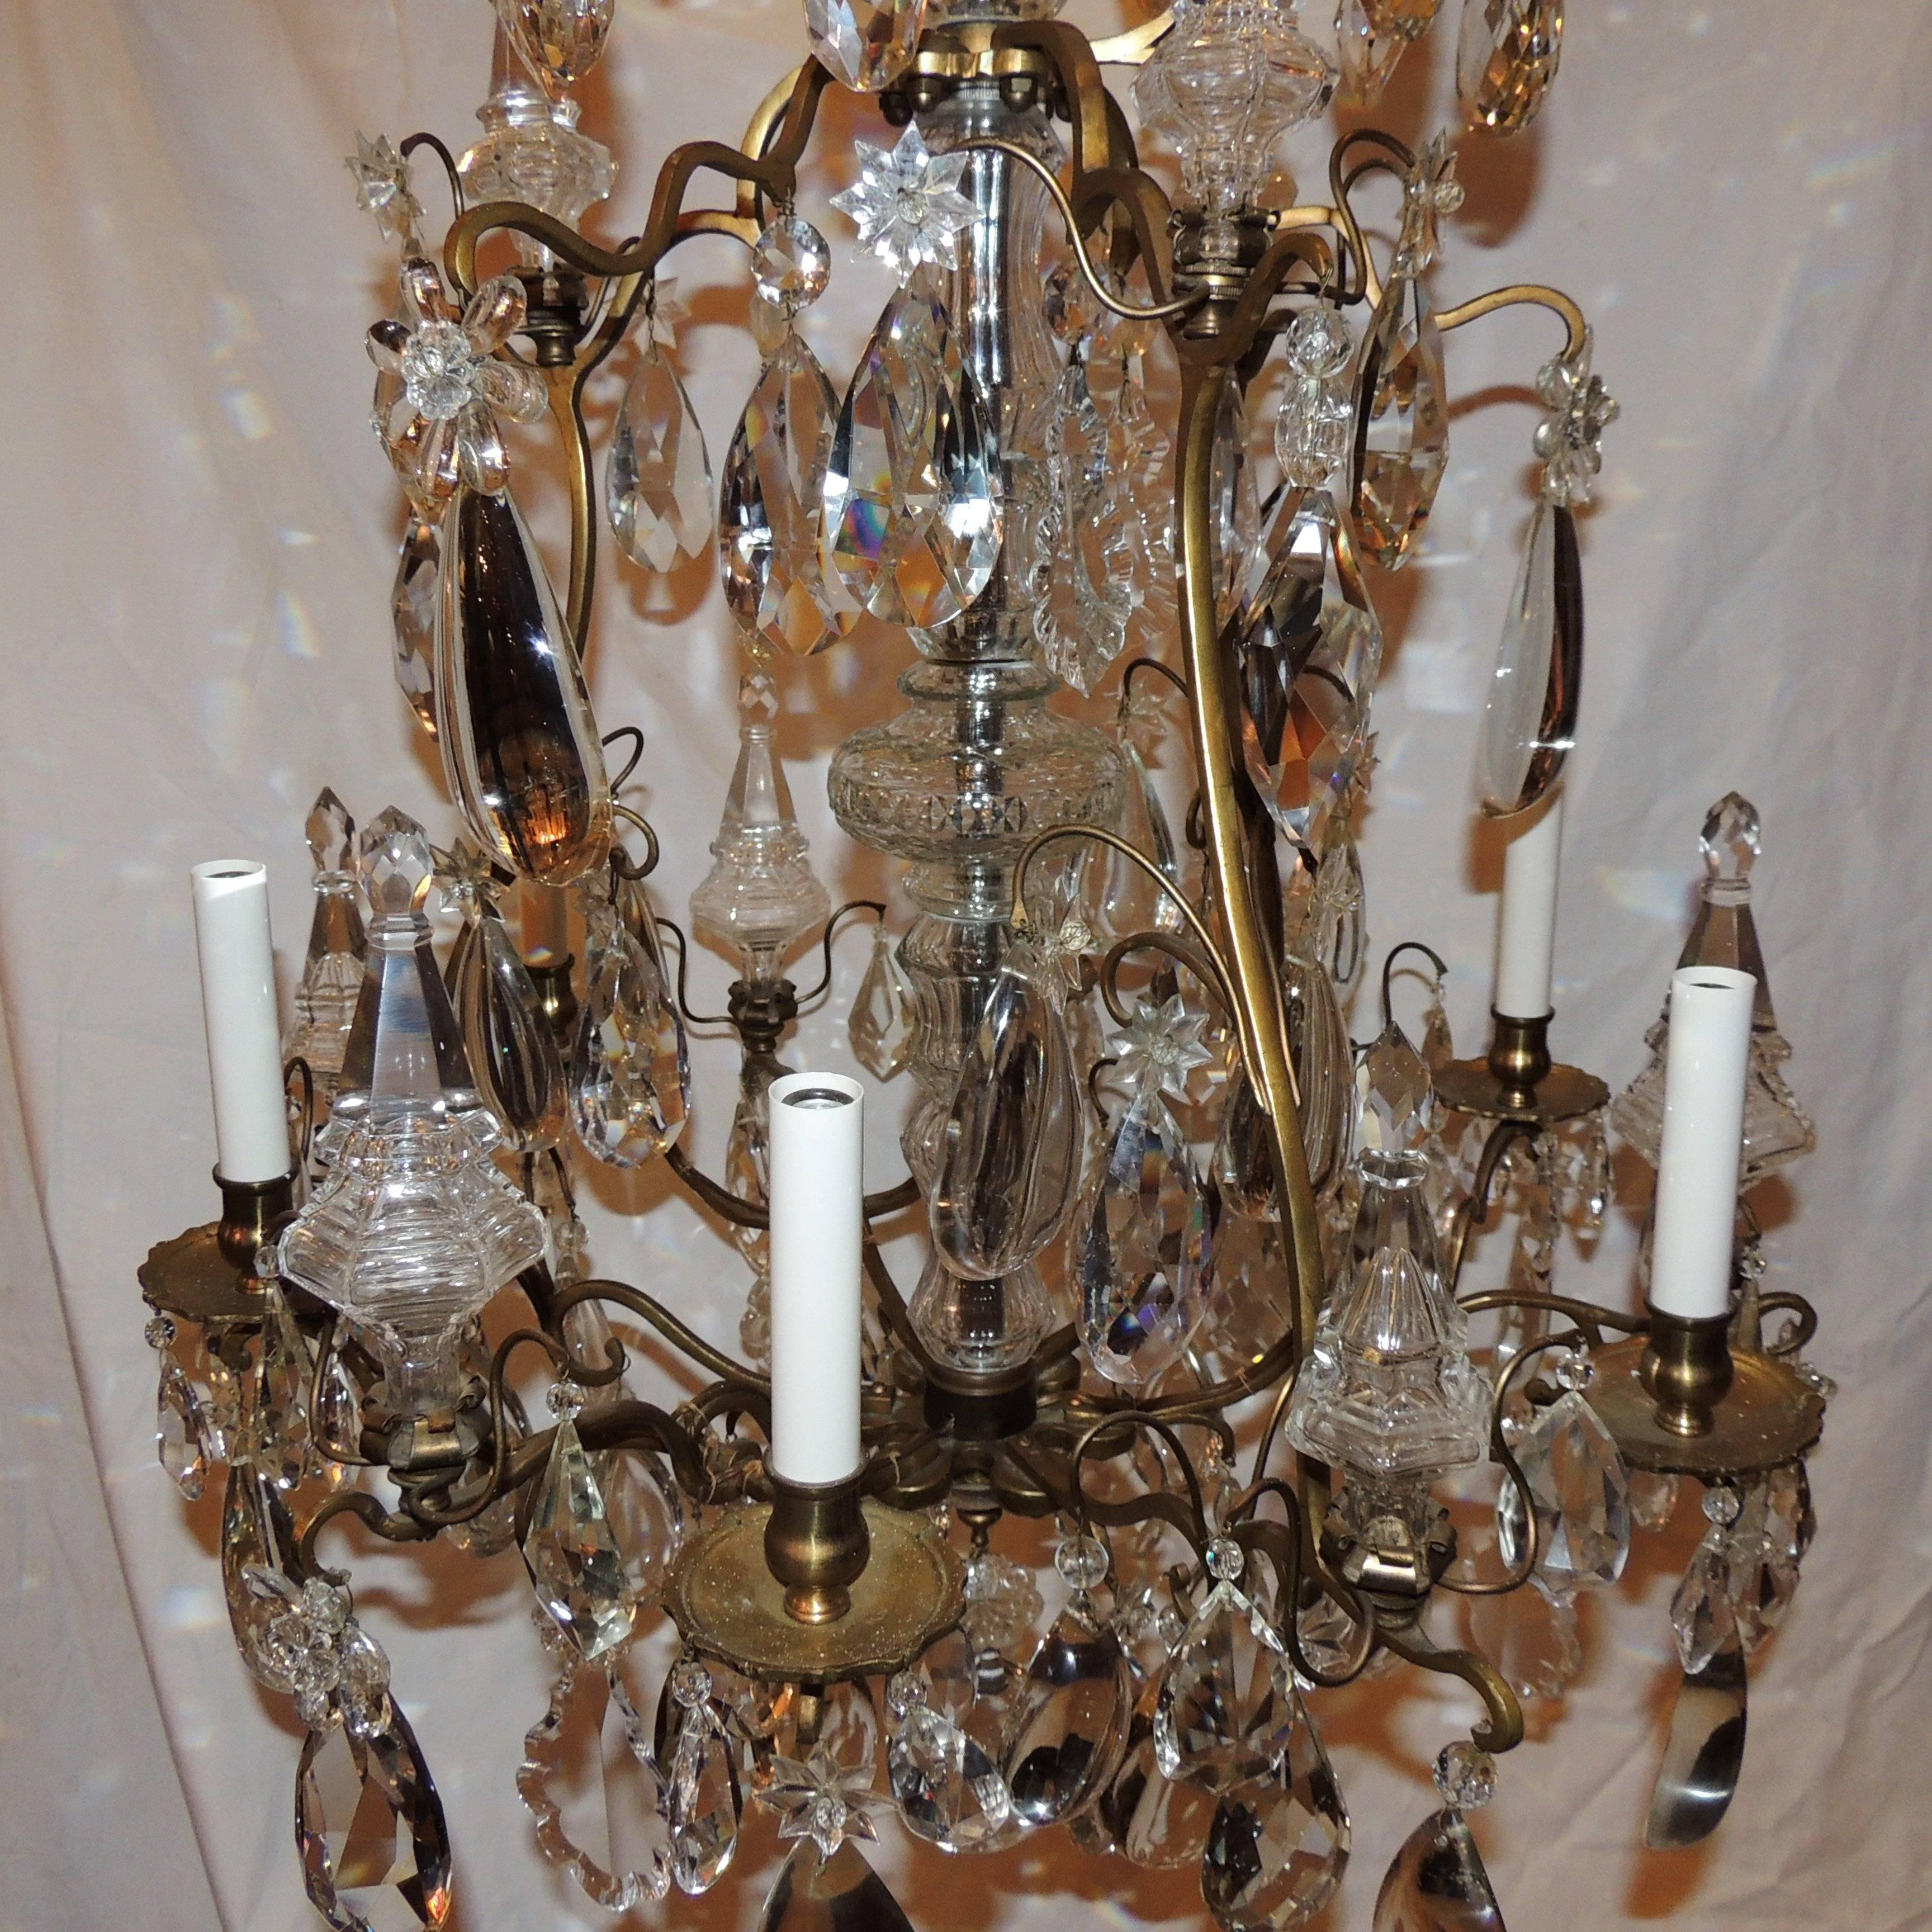 Fine French Dore Bronze Crystal Obilisk Six-Light Baccarat Chandelier Fixture In Good Condition For Sale In Roslyn, NY